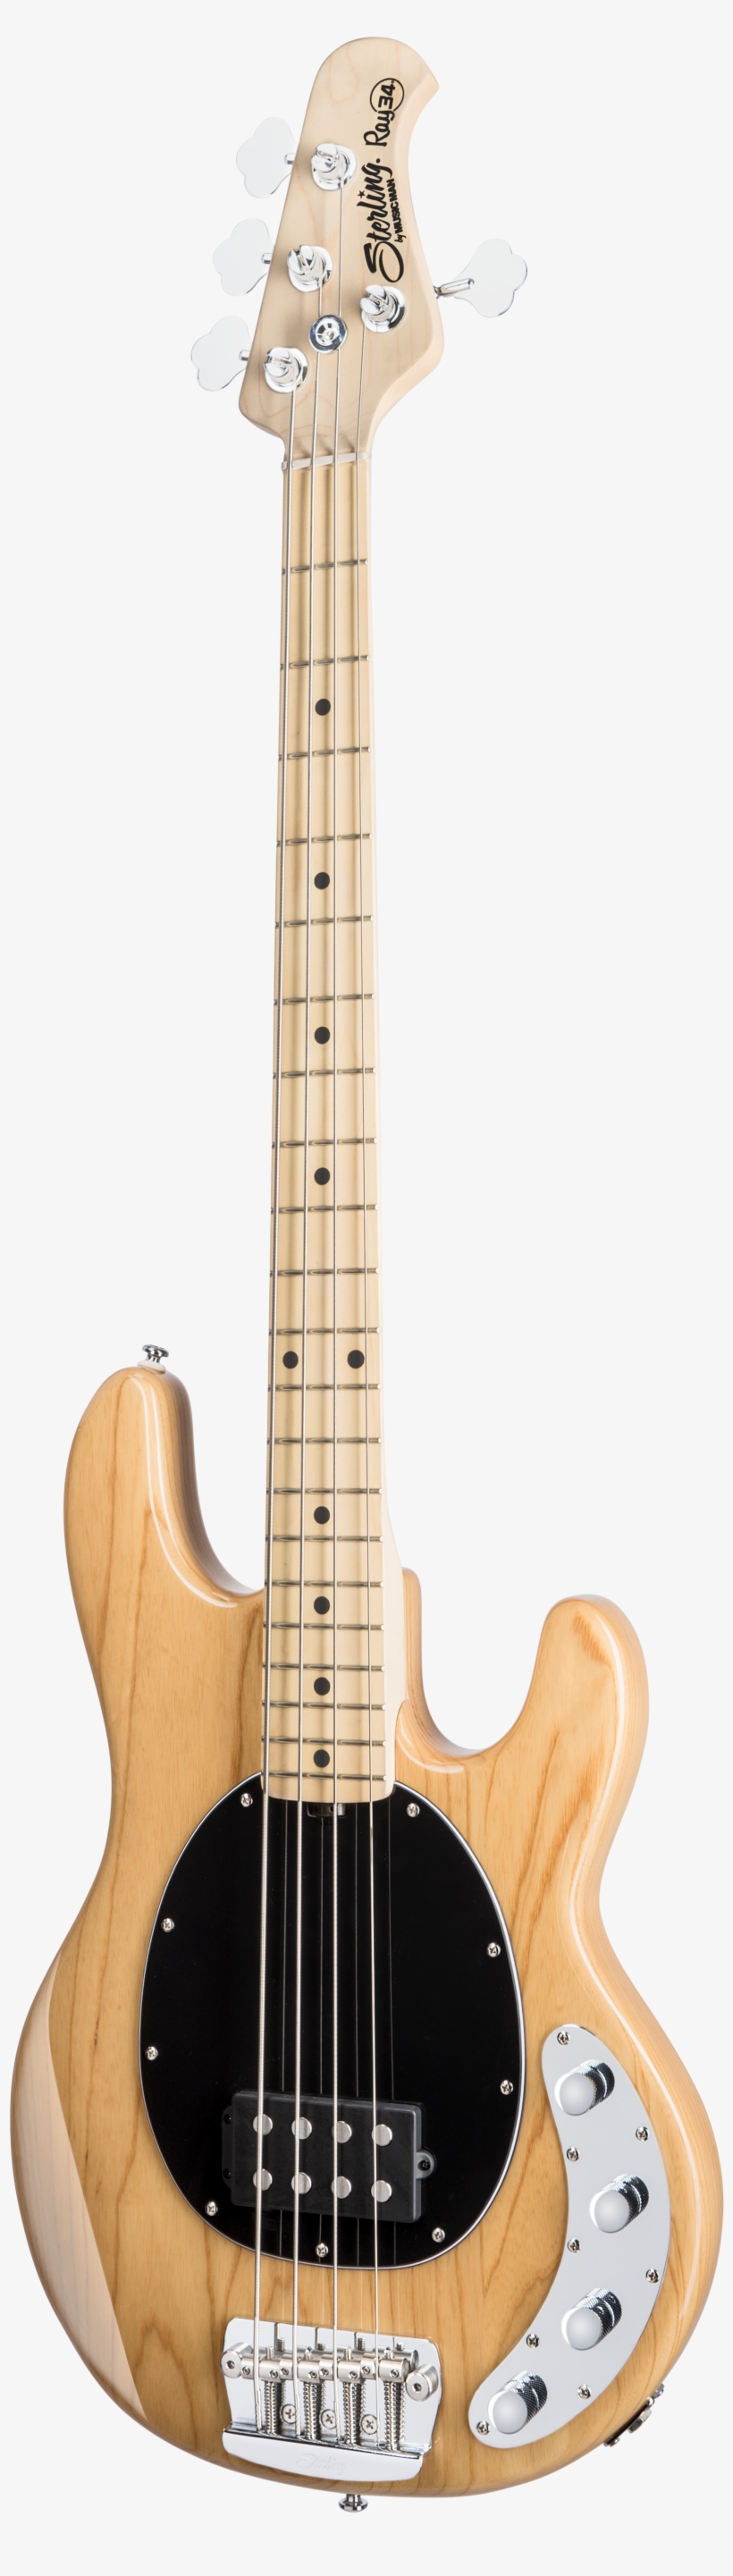 Sterling By Music Man Stingray In Ashwood Natural - Music Man Bass 4 String, transparent png #5015525